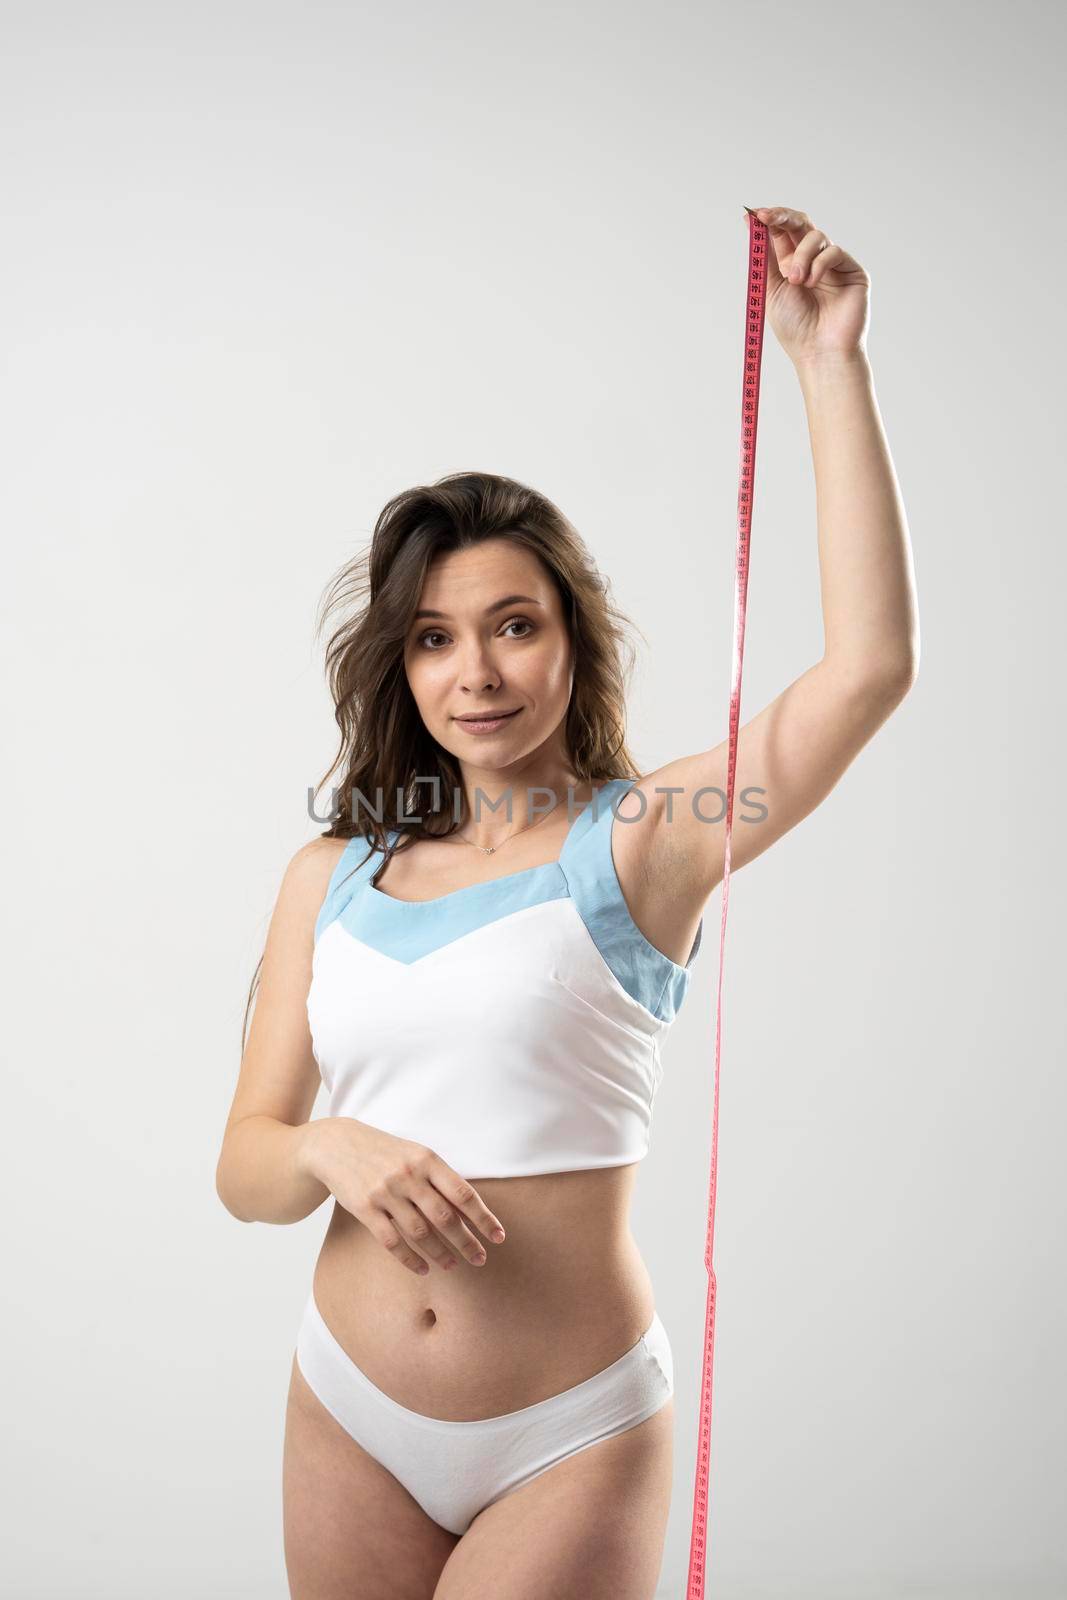 Confused brunette woman with slim body in white underwear on a diet looking in a camera and showing a pink centimeter tape. Healthy lifestyles concept. Sport and diet